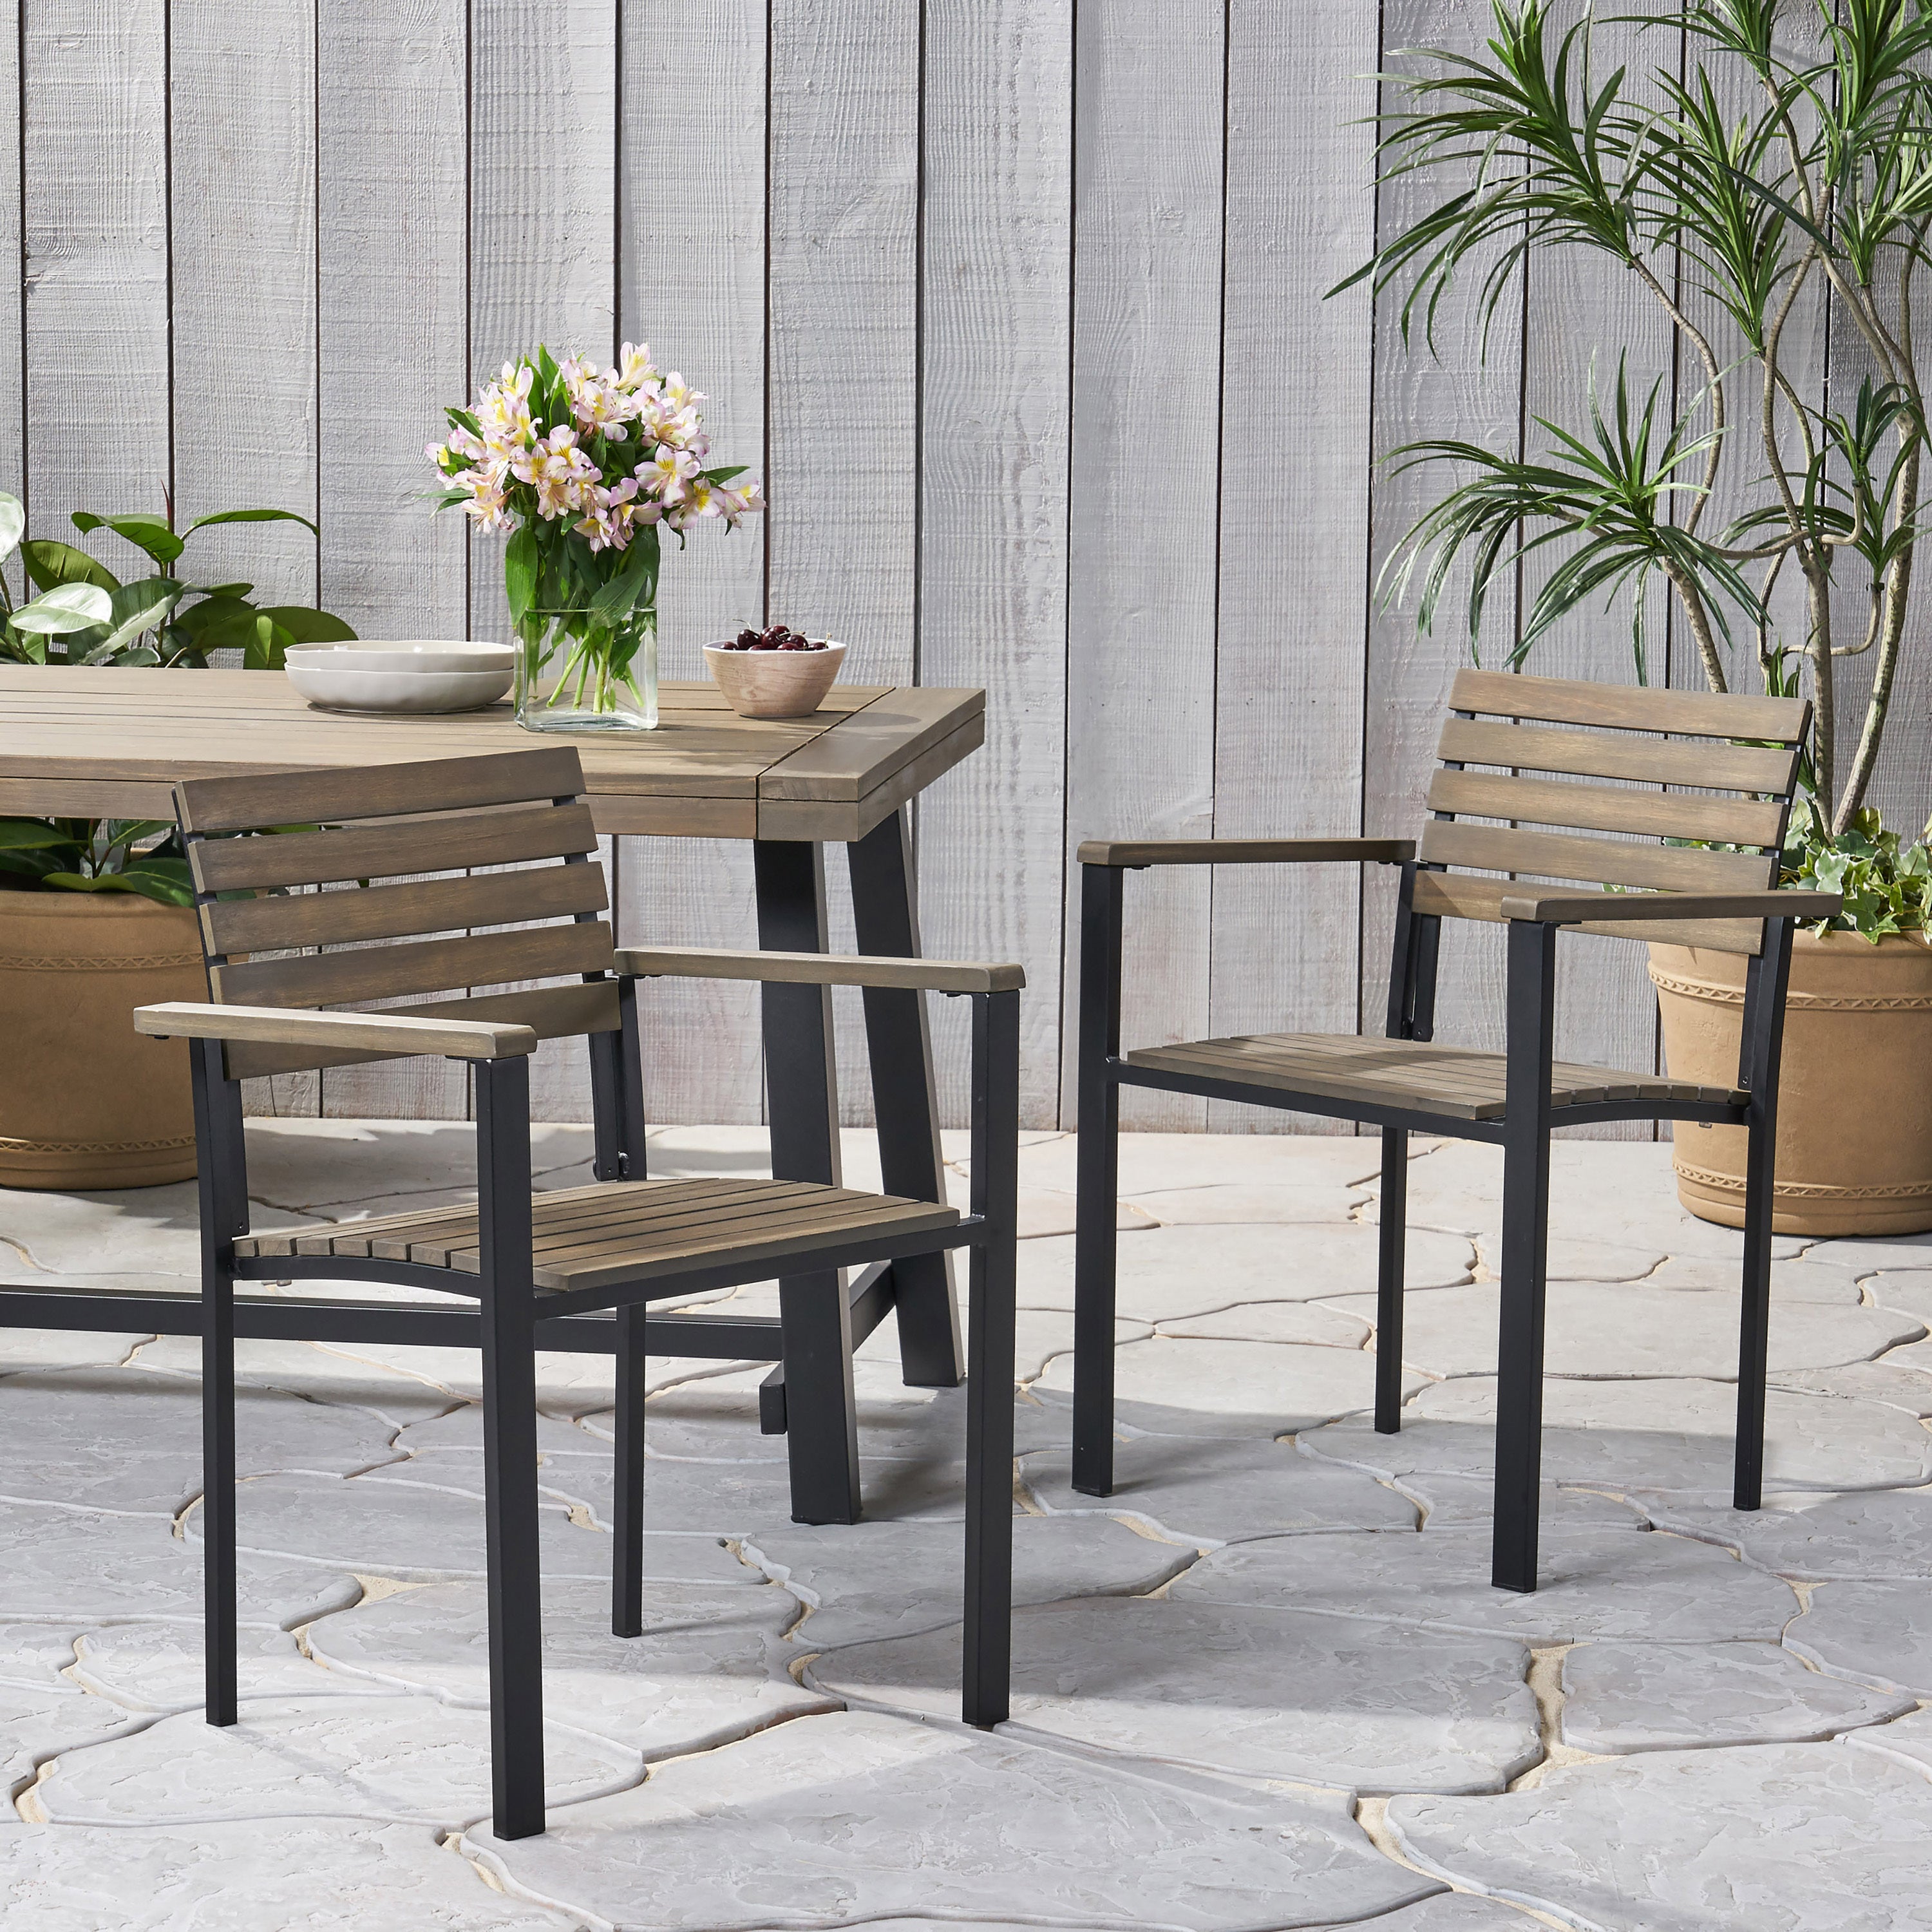 TM-HOME-OUTDOOR--WOOD-AND-METAL-CHAIR-SET-OF-2-Outdoor-Furniture-Sets